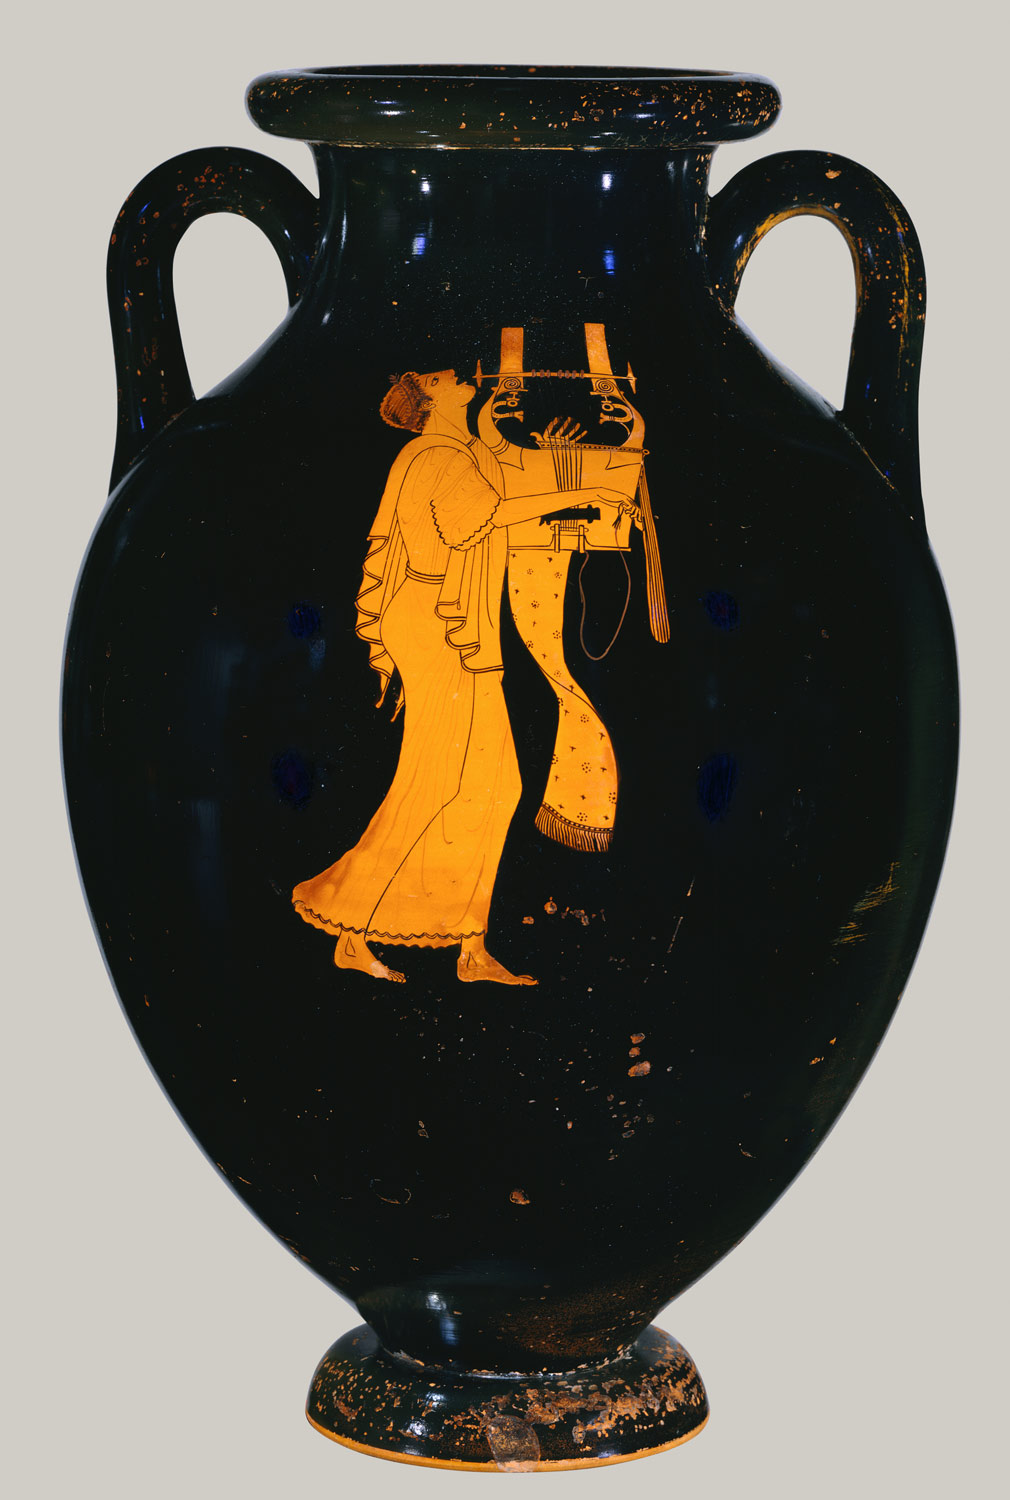 Terracotta amphora (jar) | Attributed to the Berlin Painter | 56.171.38